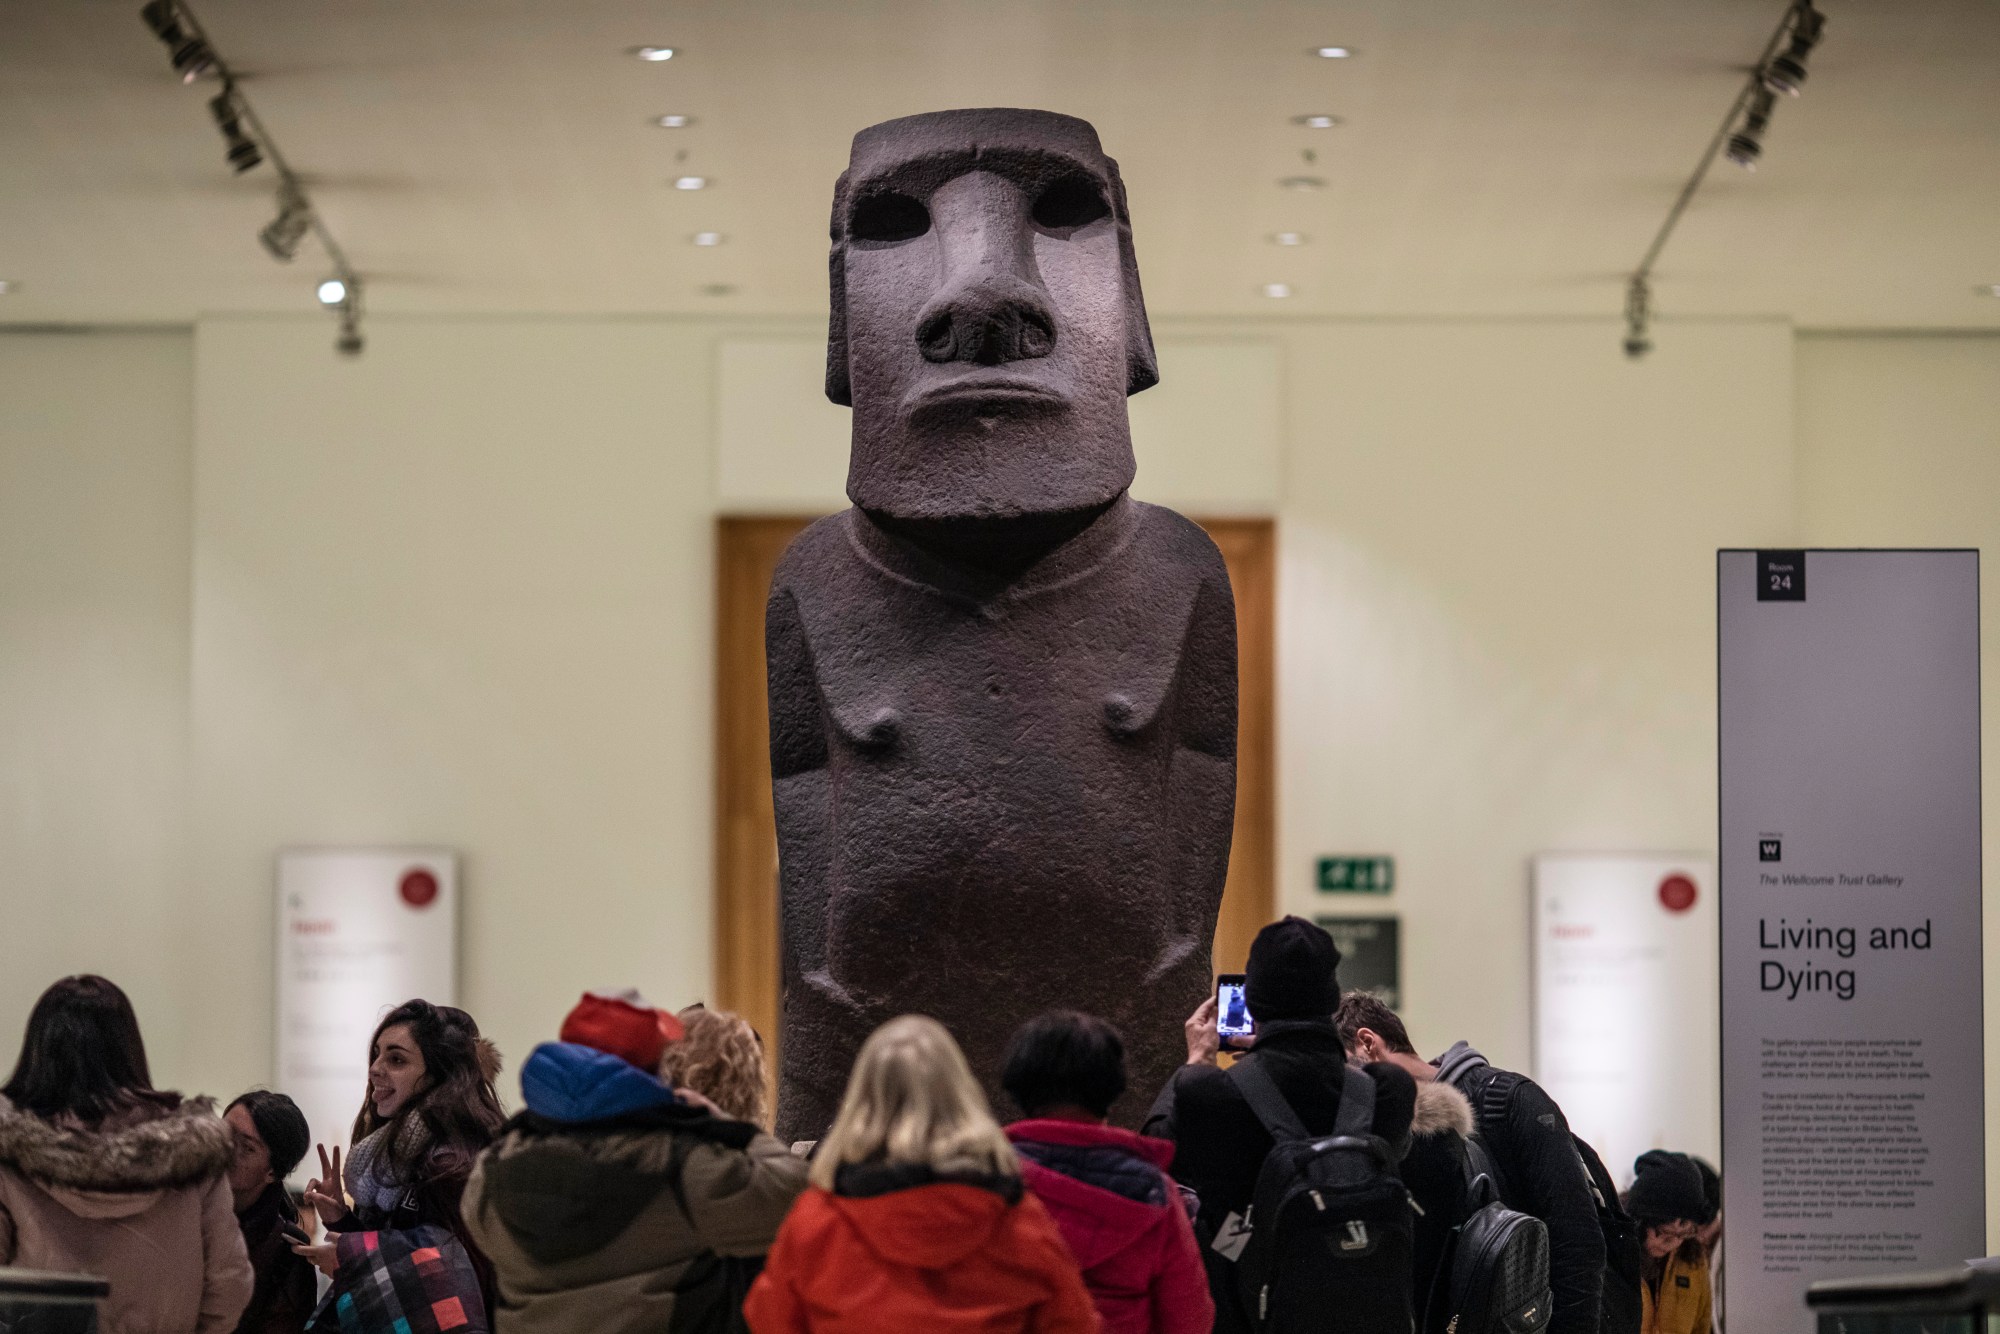 A large basalt sculpture of a shirtless figure with a large face. The sculpture towers above people who stand below.